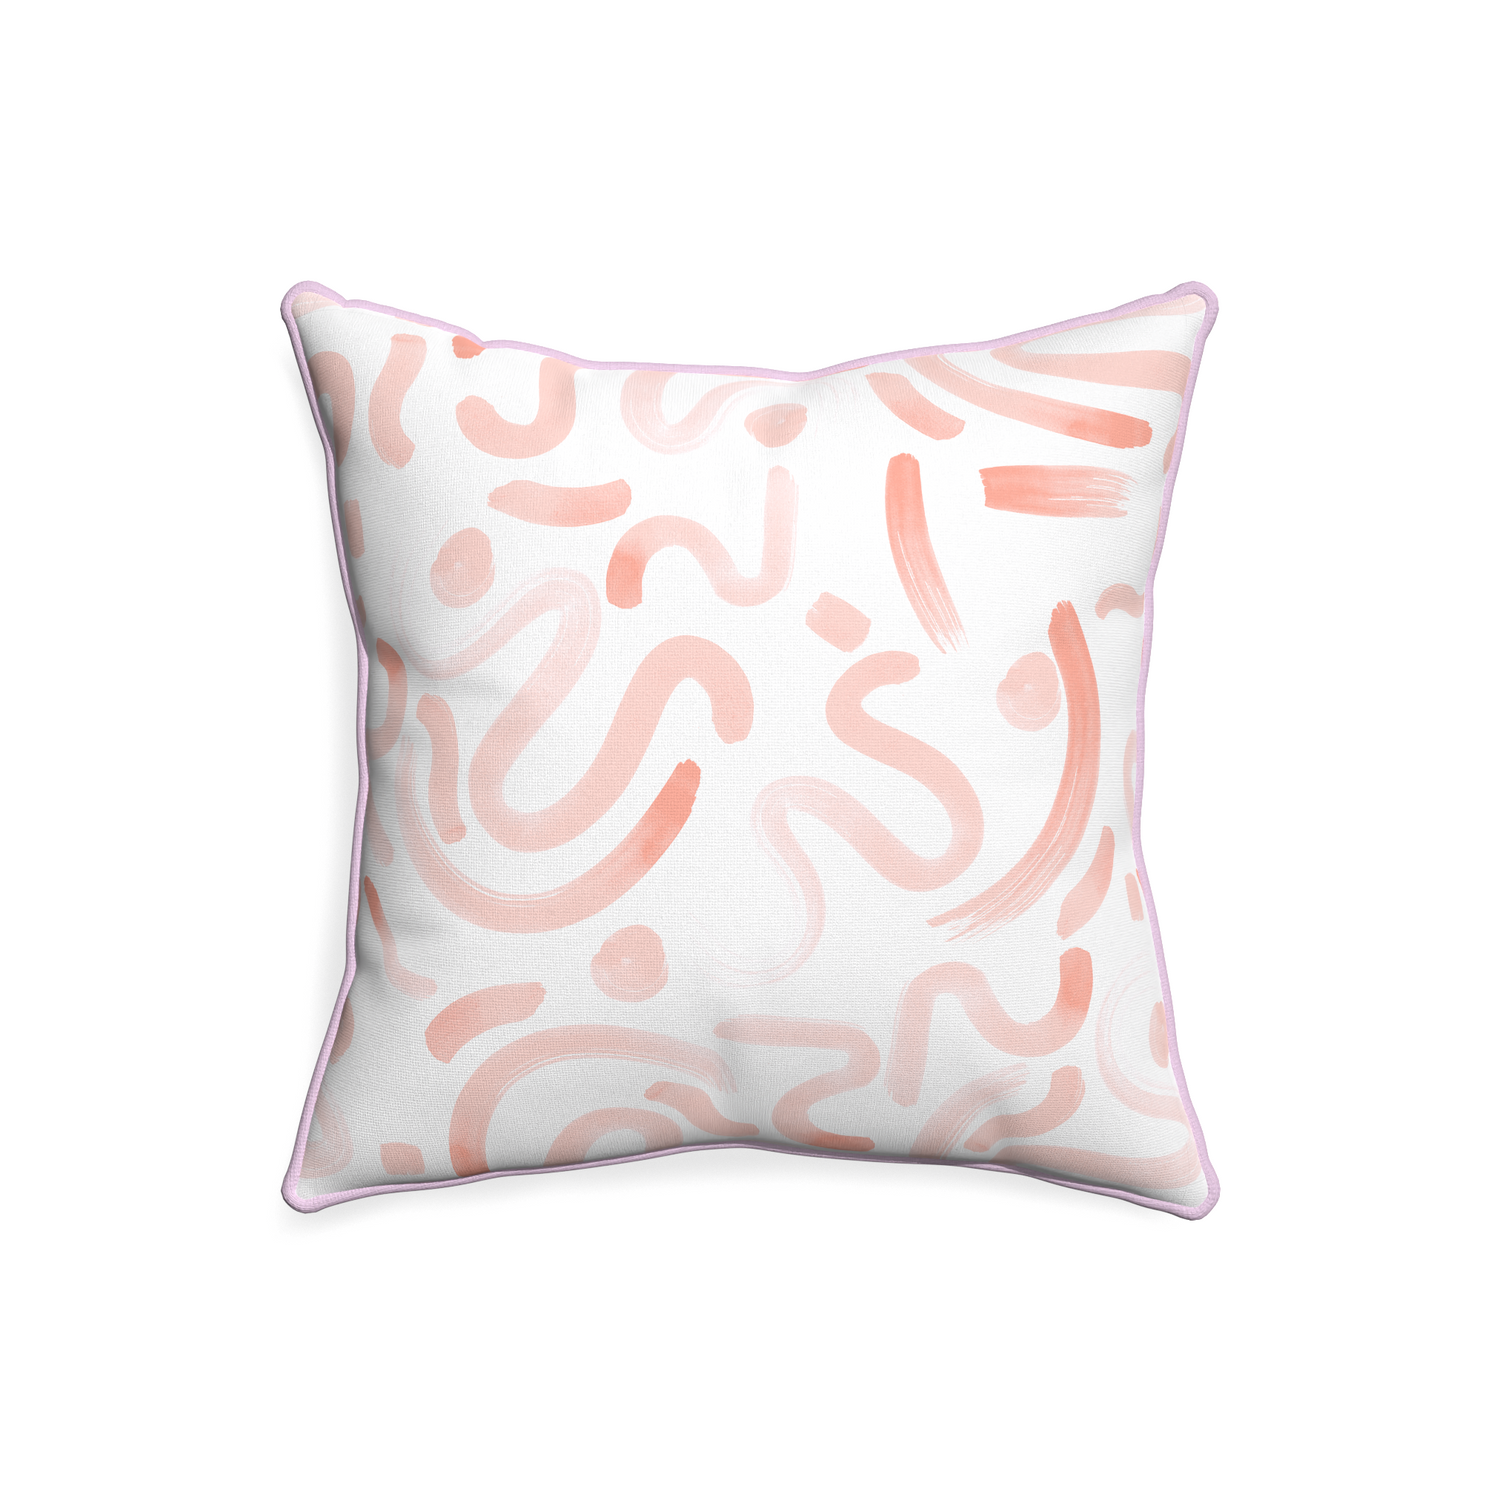 20-square hockney pink custom pink graphicpillow with l piping on white background